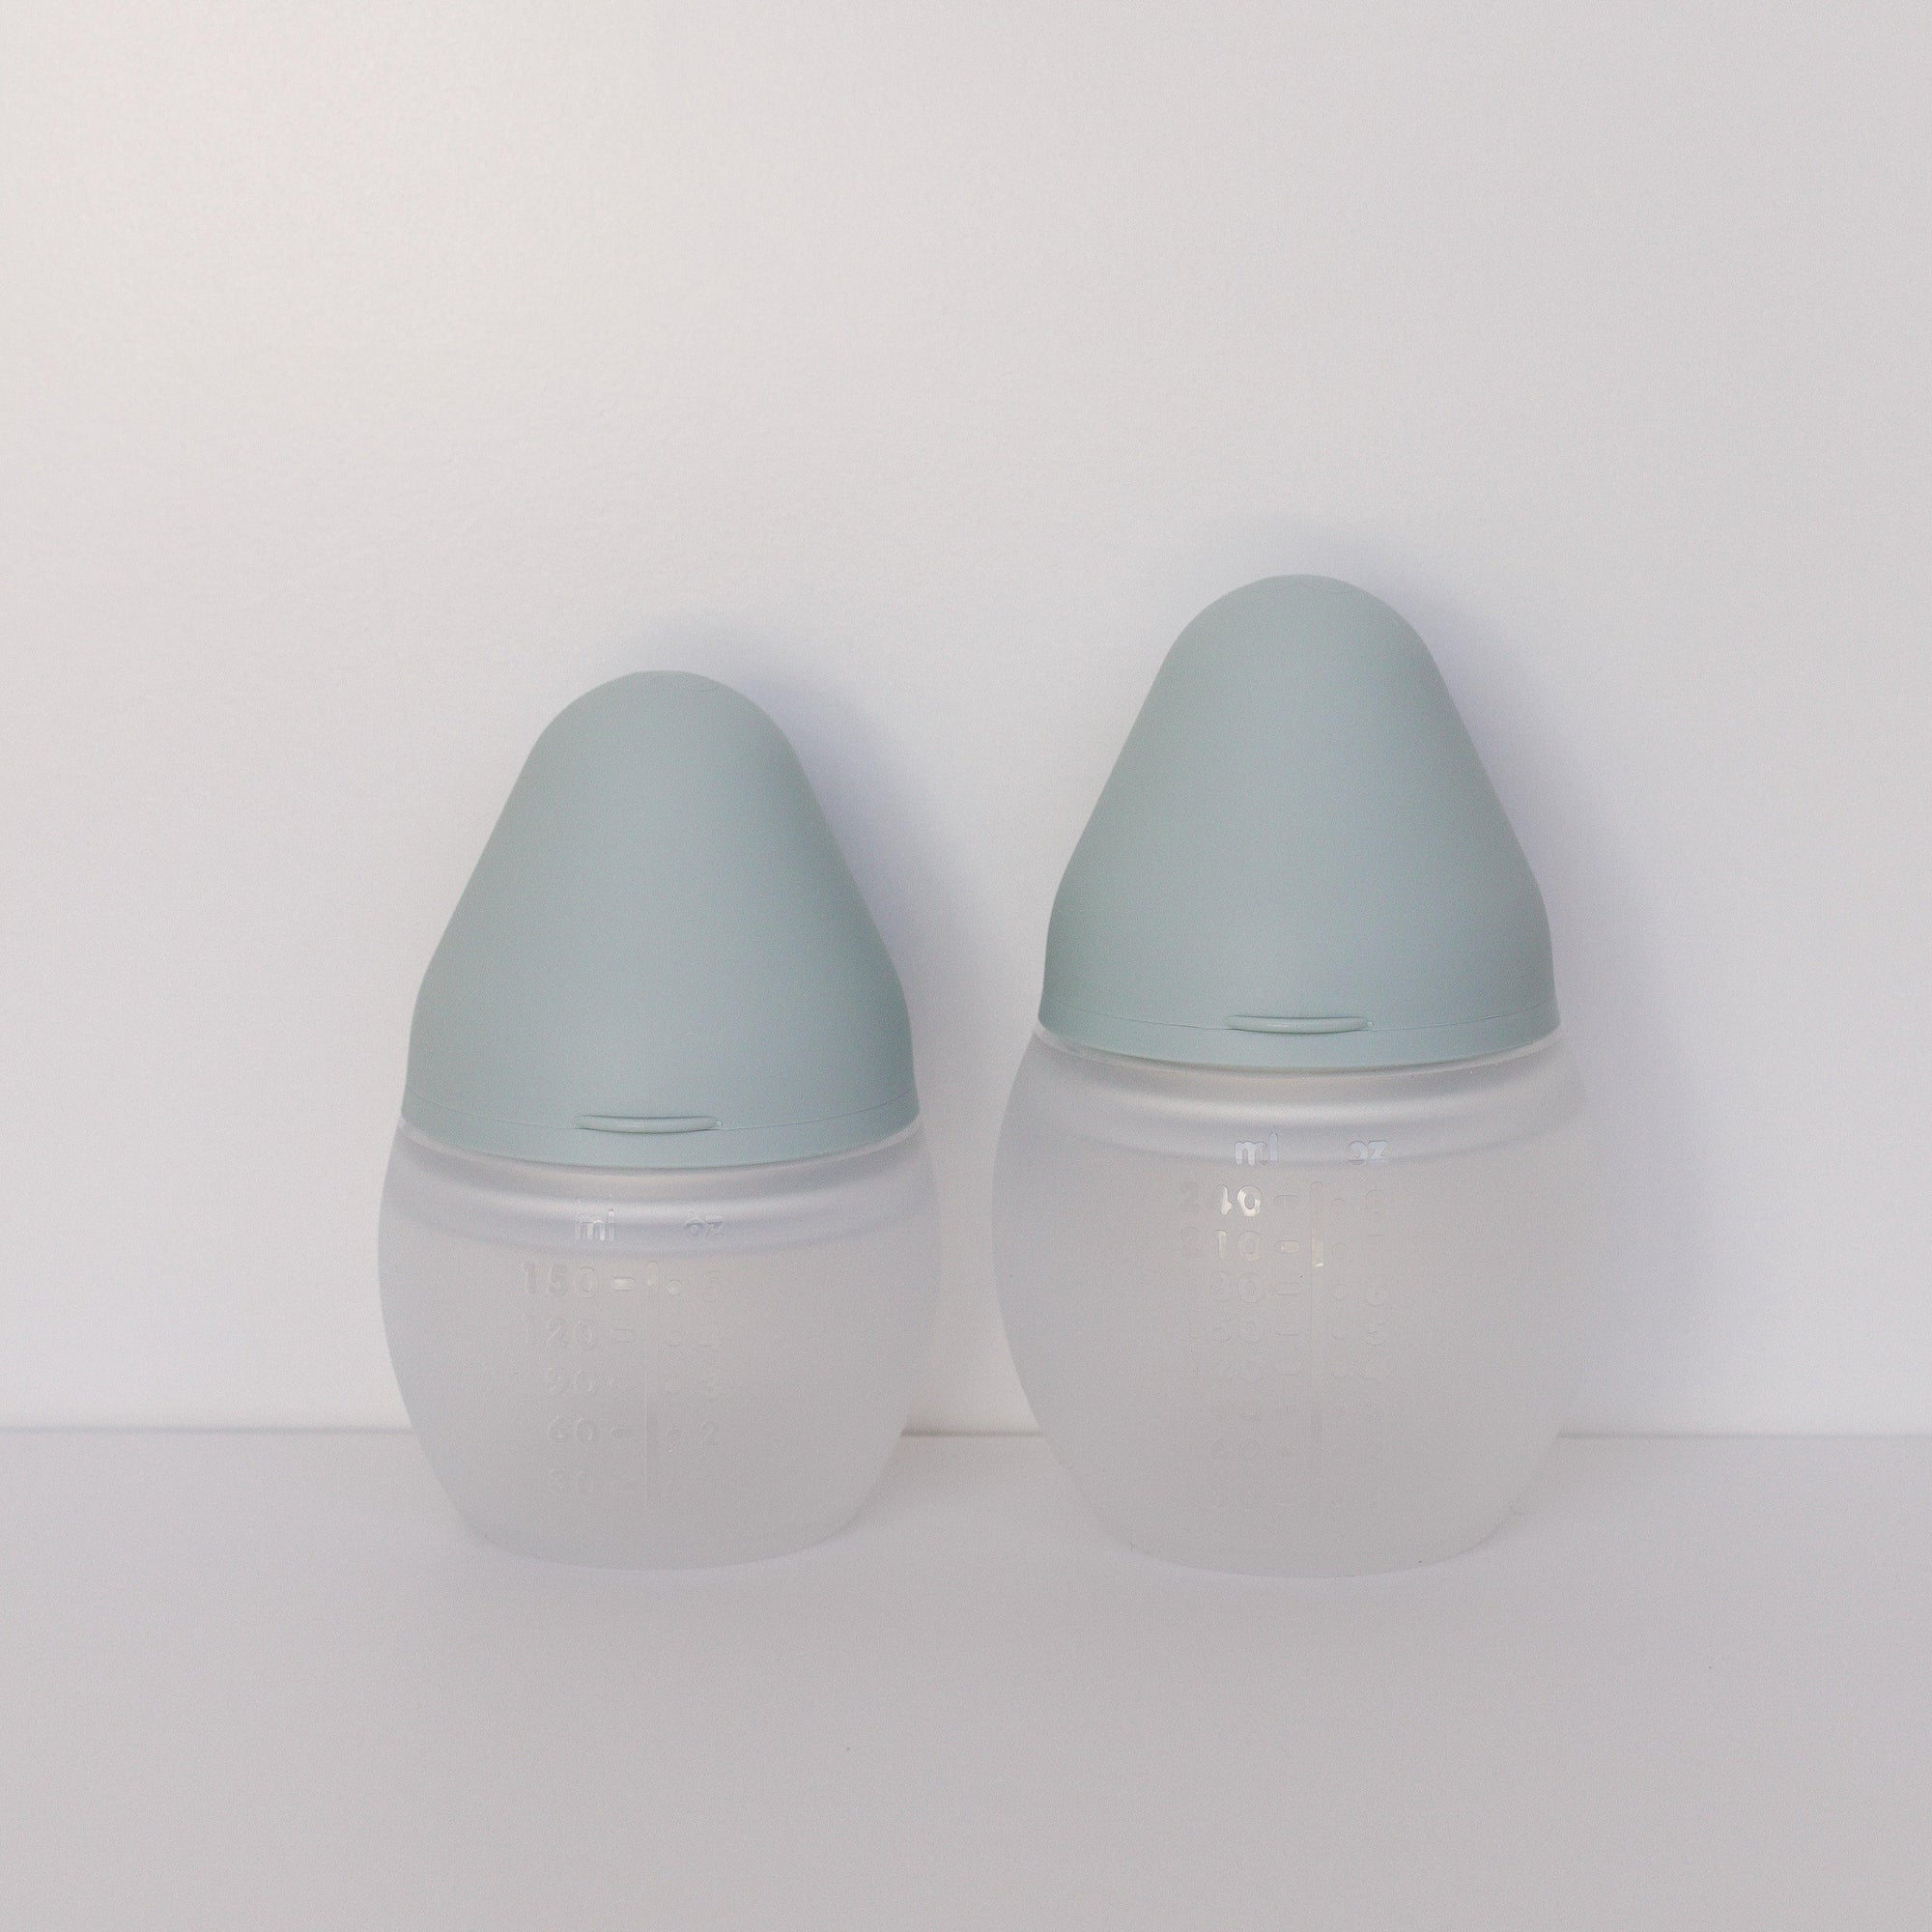 Two Elhée France BibRond ivy green baby bottles on a white surface.